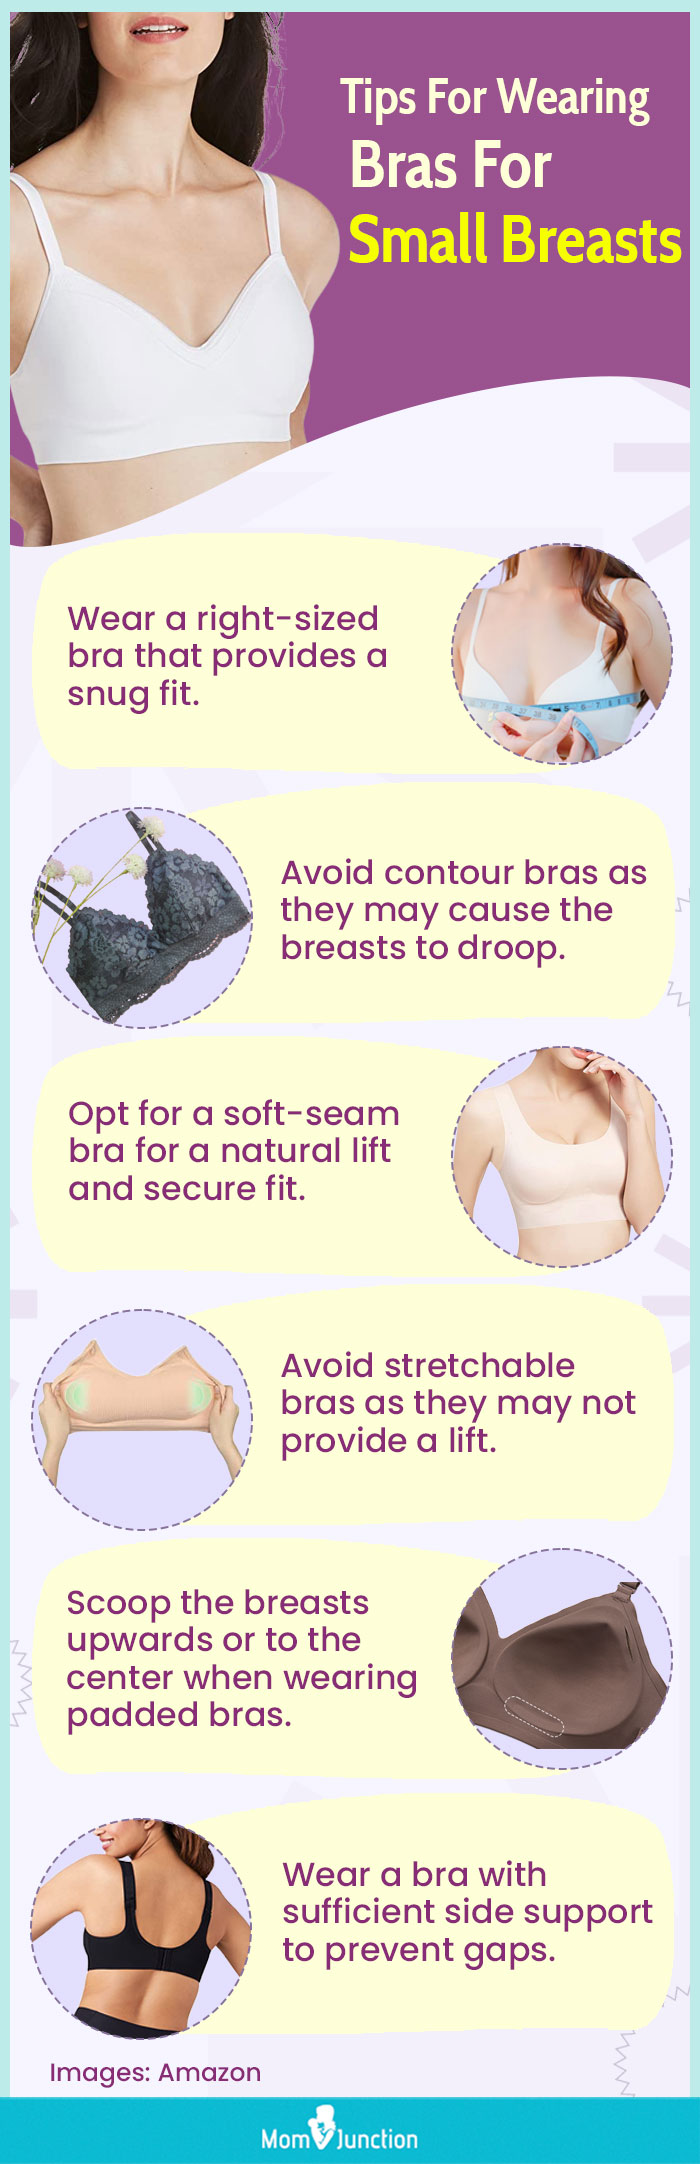 Tips For Wearing Bras For Small Breasts (infographic)